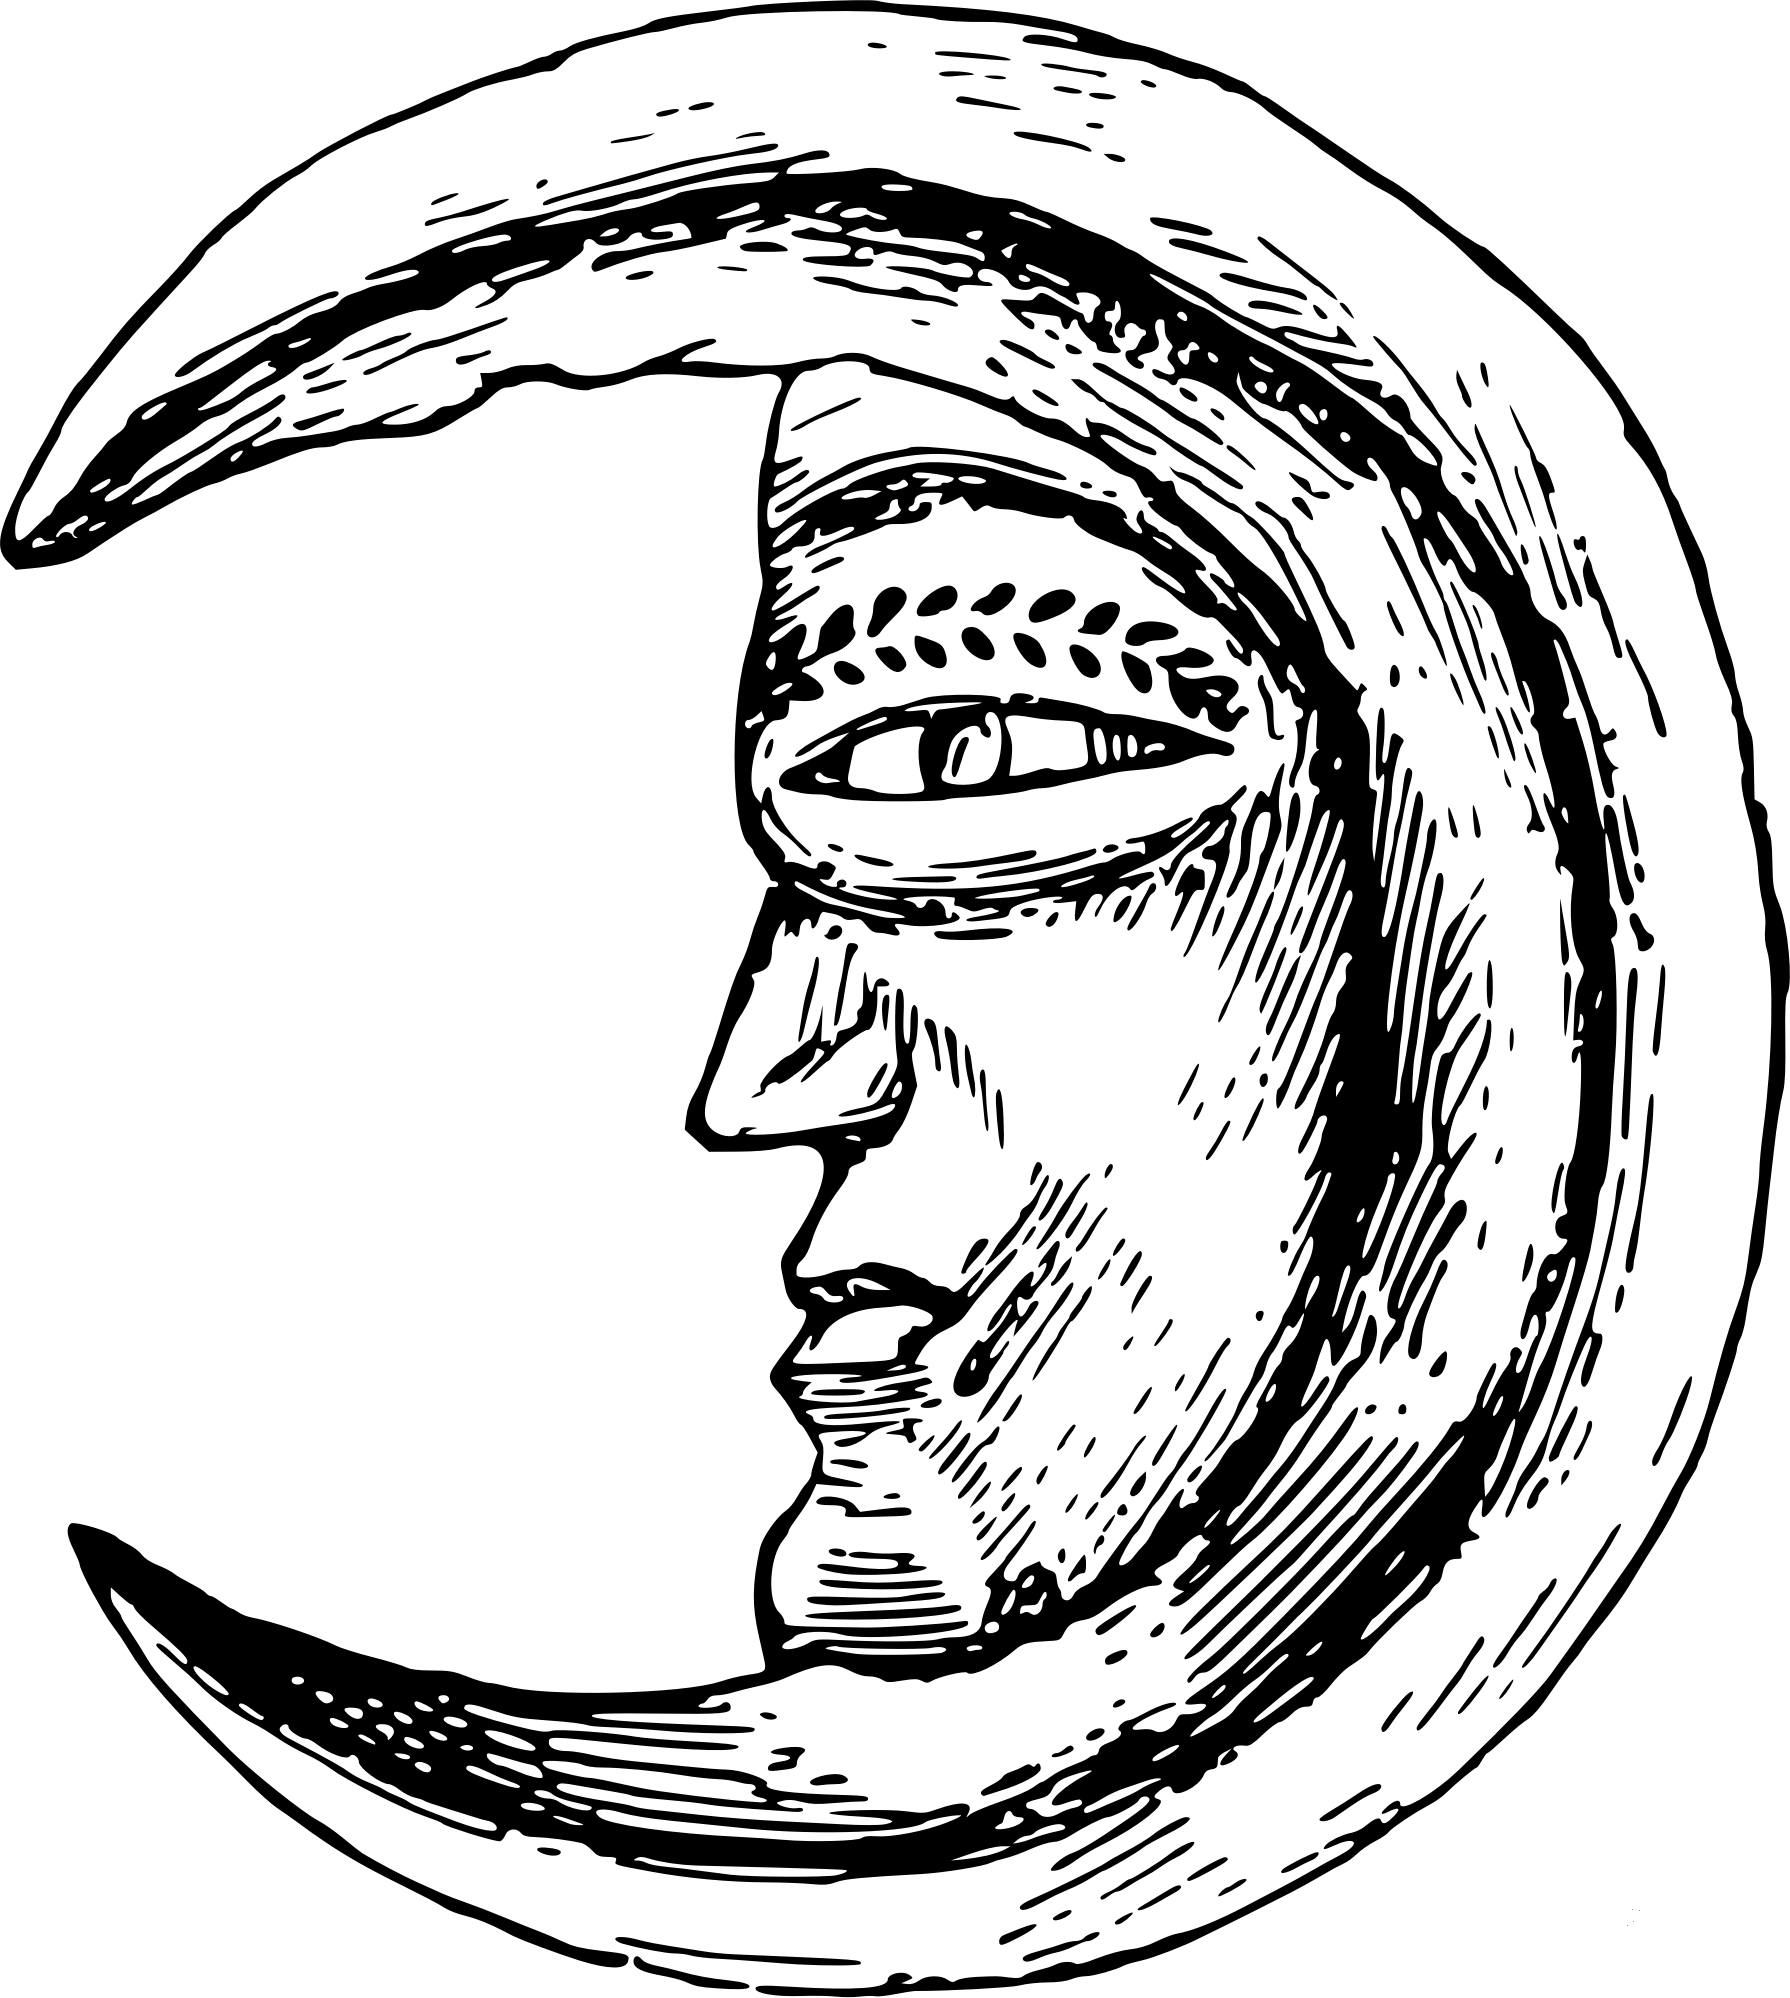 Vintage Man in the Moon coloring page ColouringPages